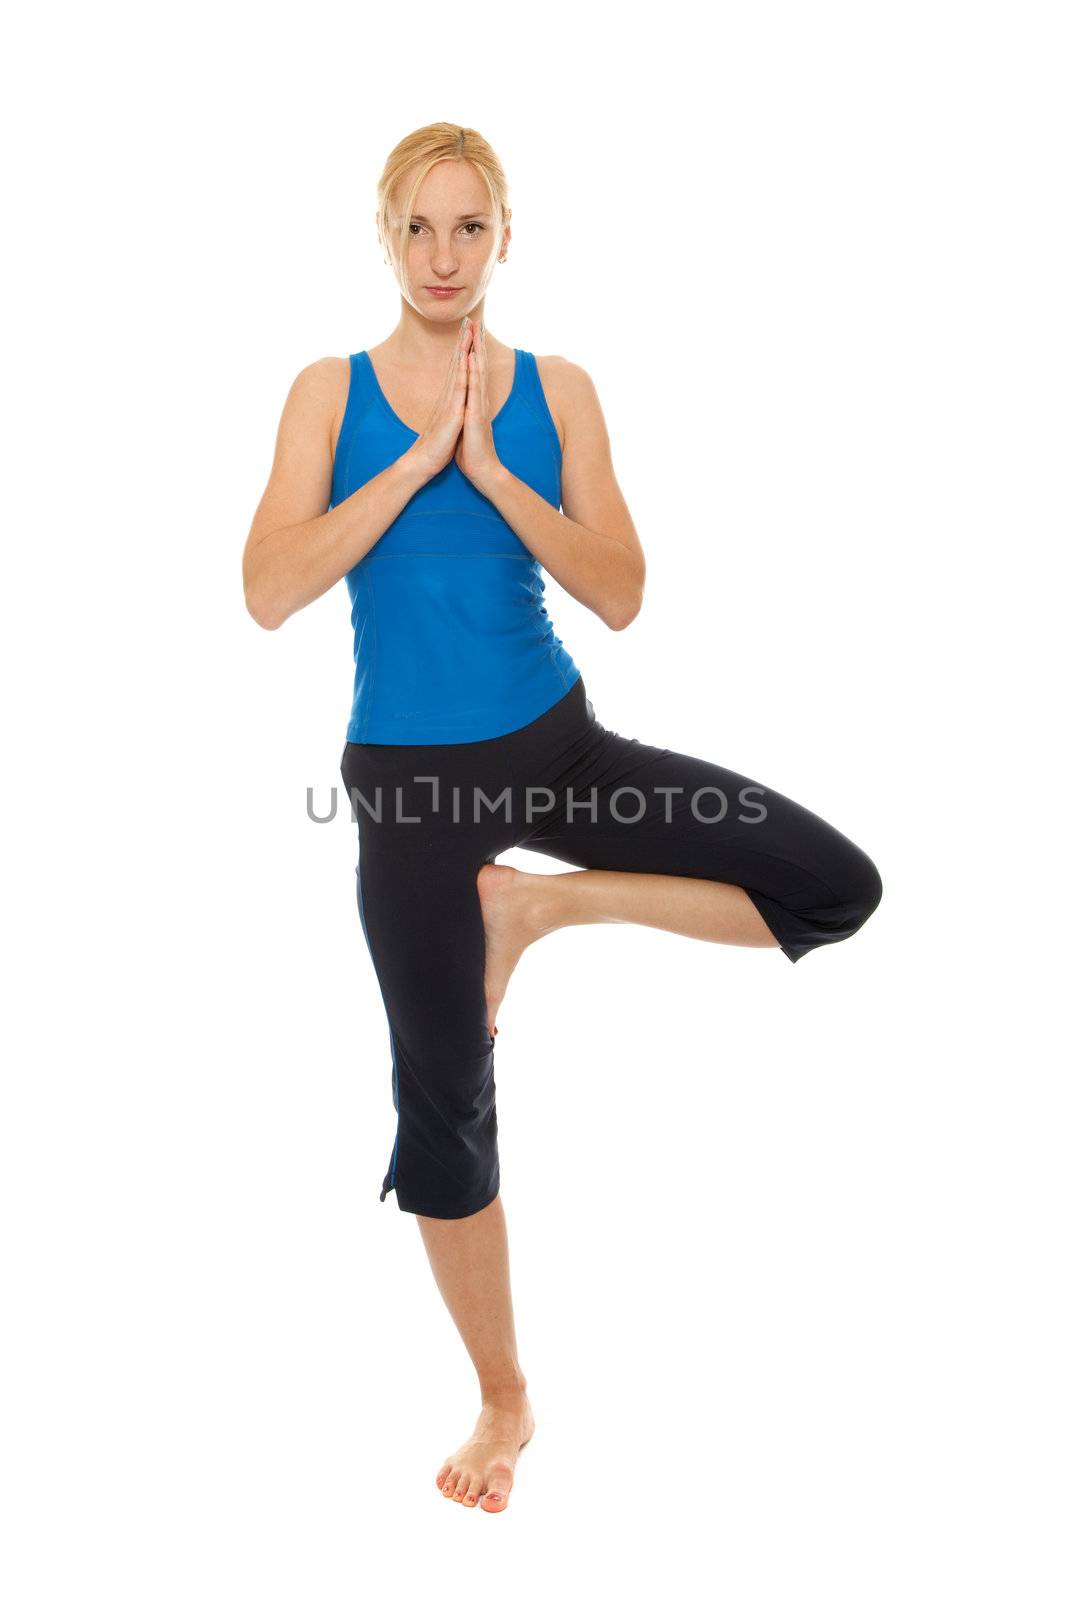 Practicing Yoga. Young woman by bloodua